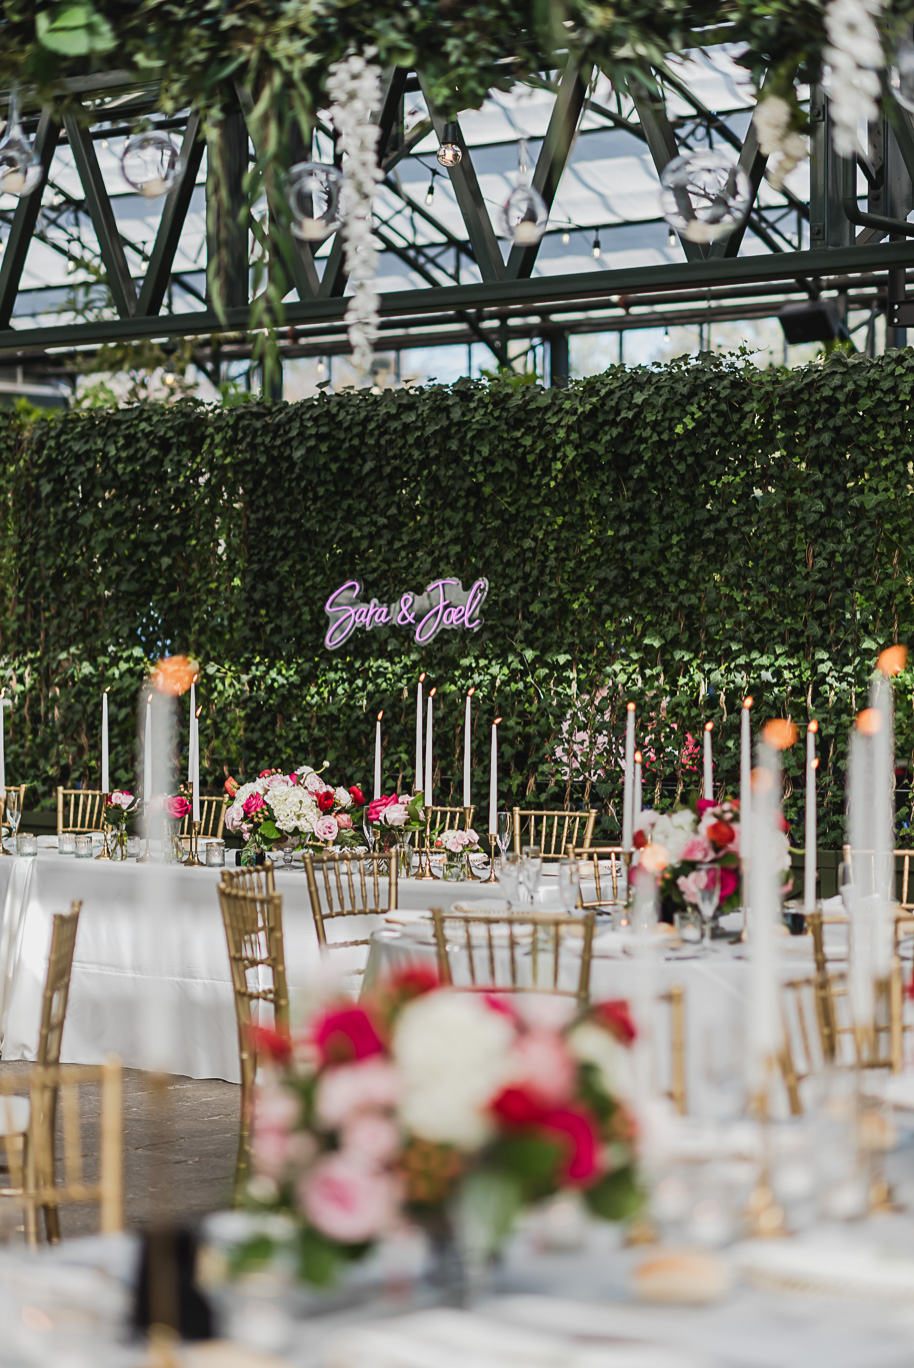 Blush and black spring Planterra Conservatory wedding in West Bloomfield, Michigan provided by Kari Dawson, top-rated Detroit wedding photographer, and her team. 